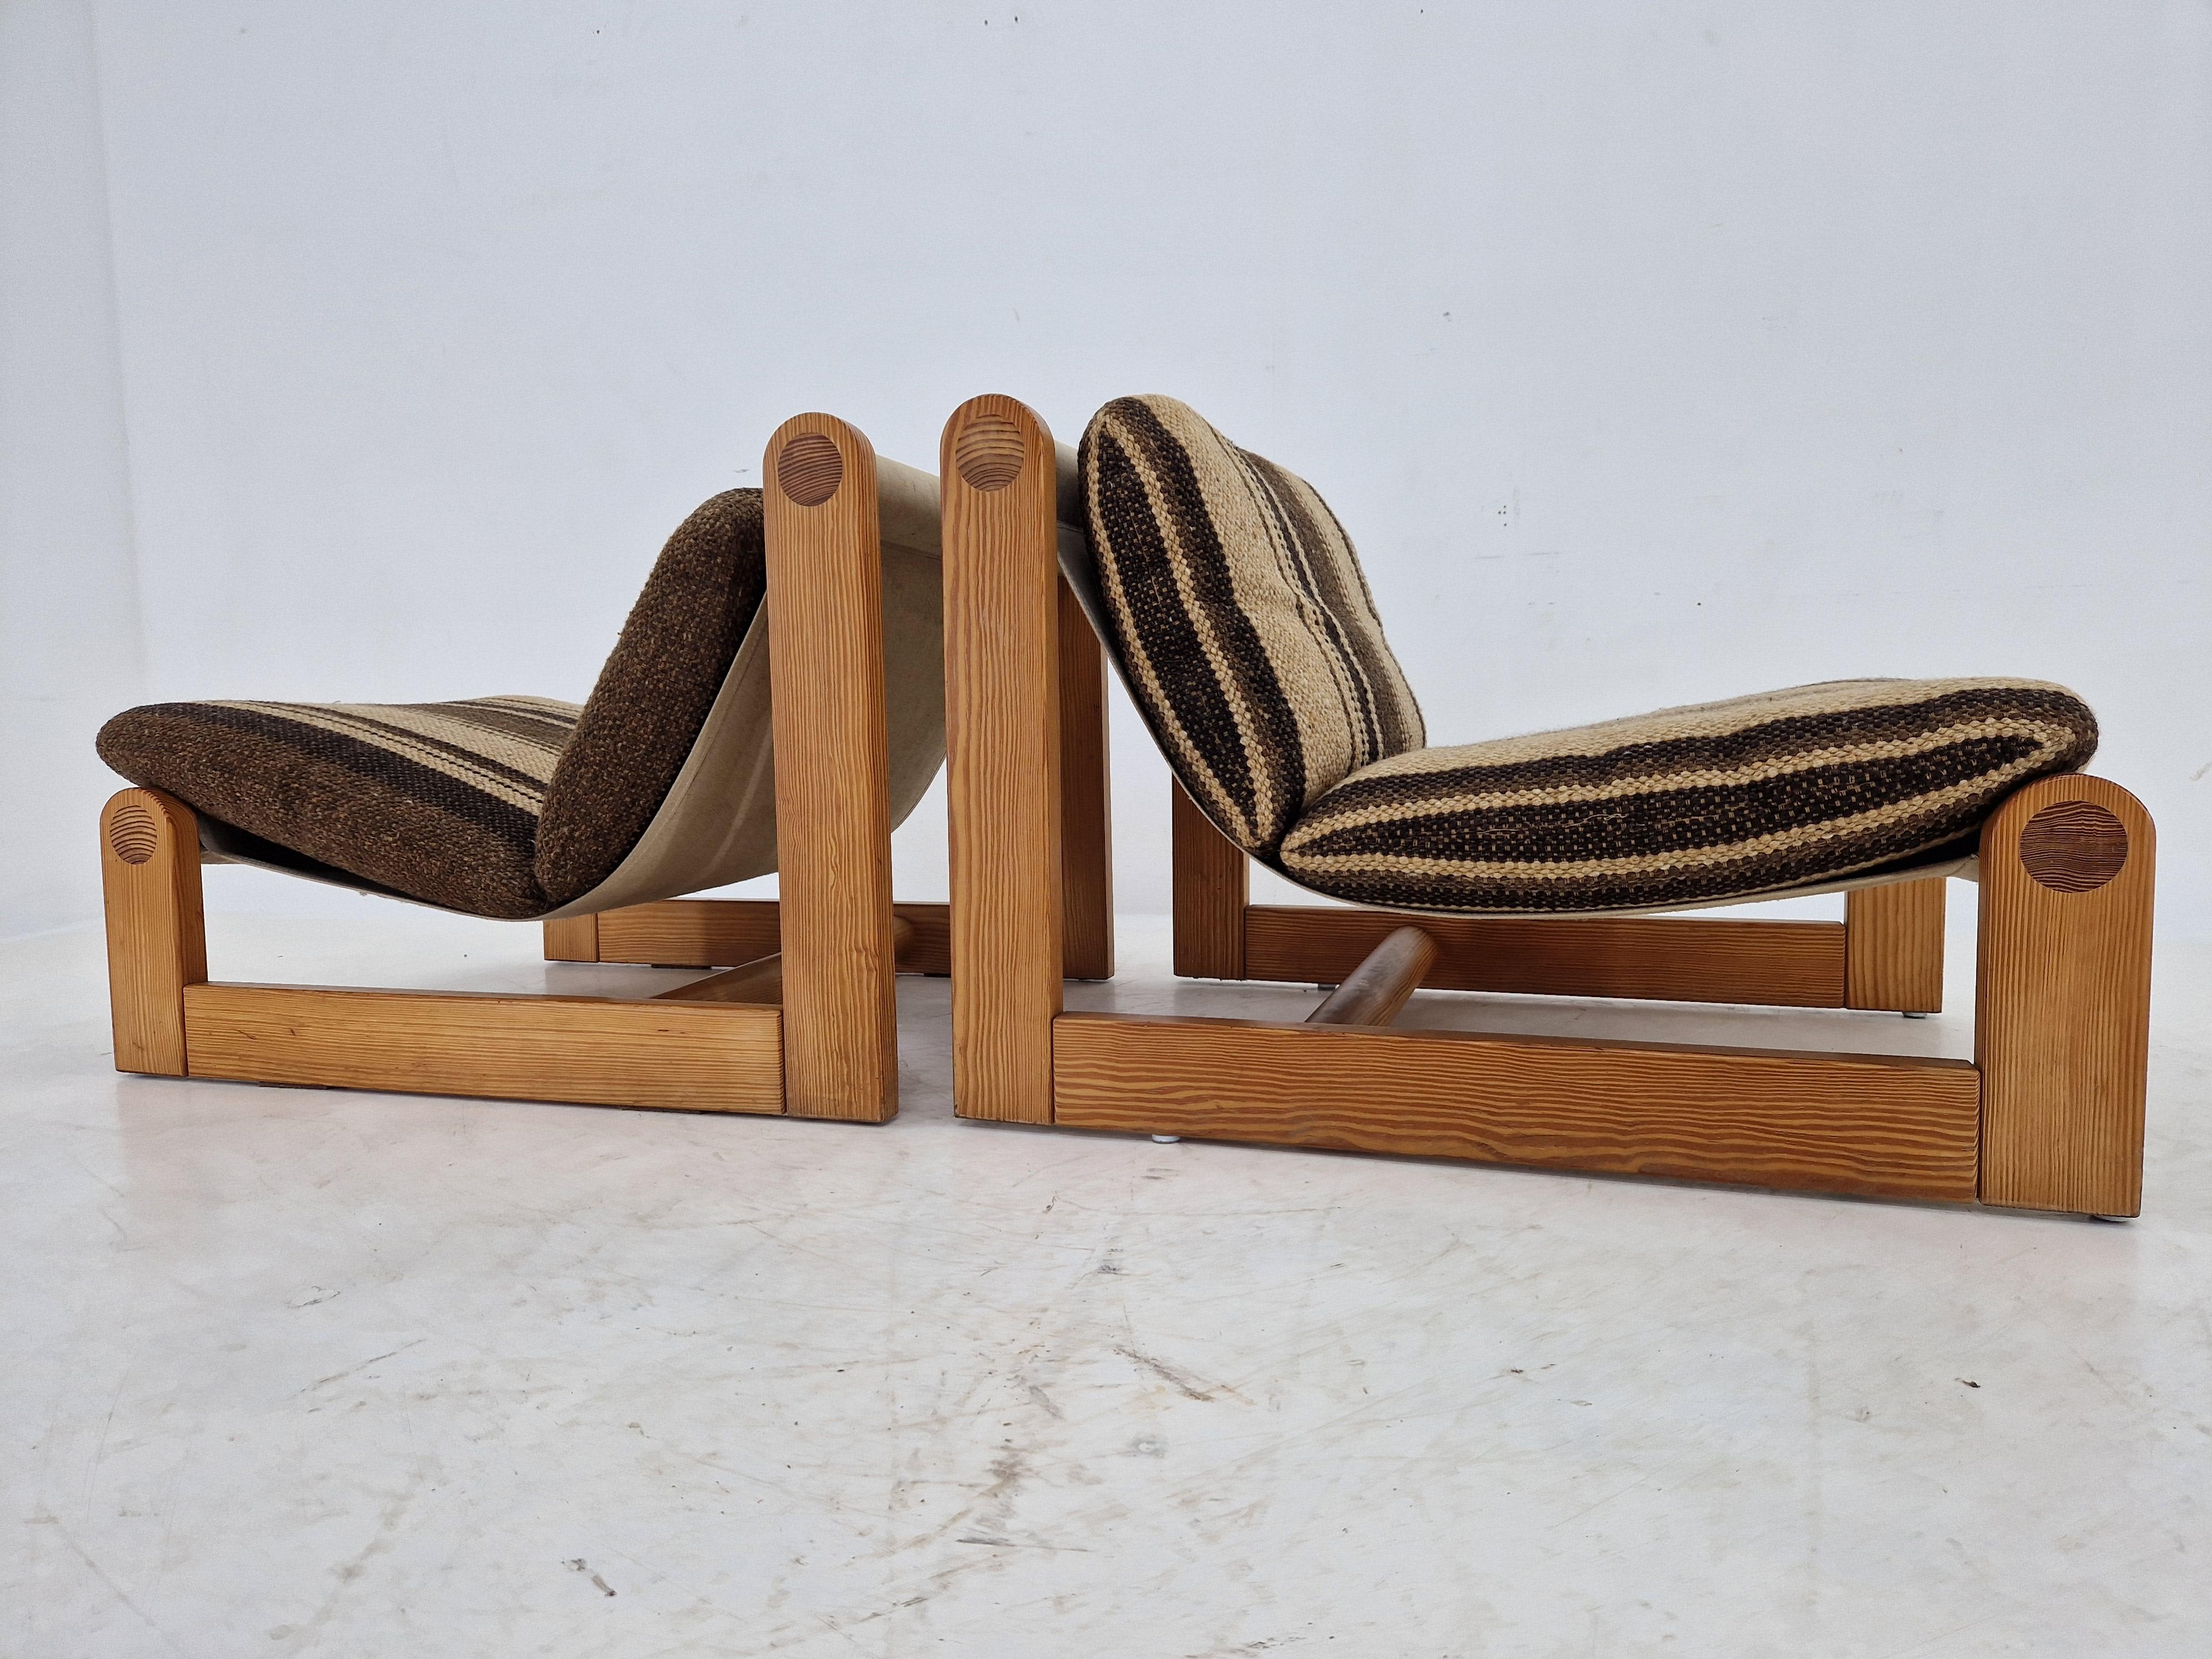 Pair of Midcentury Rare Lounge Chairs Pine Wood, Denmark, 1960s For Sale 2